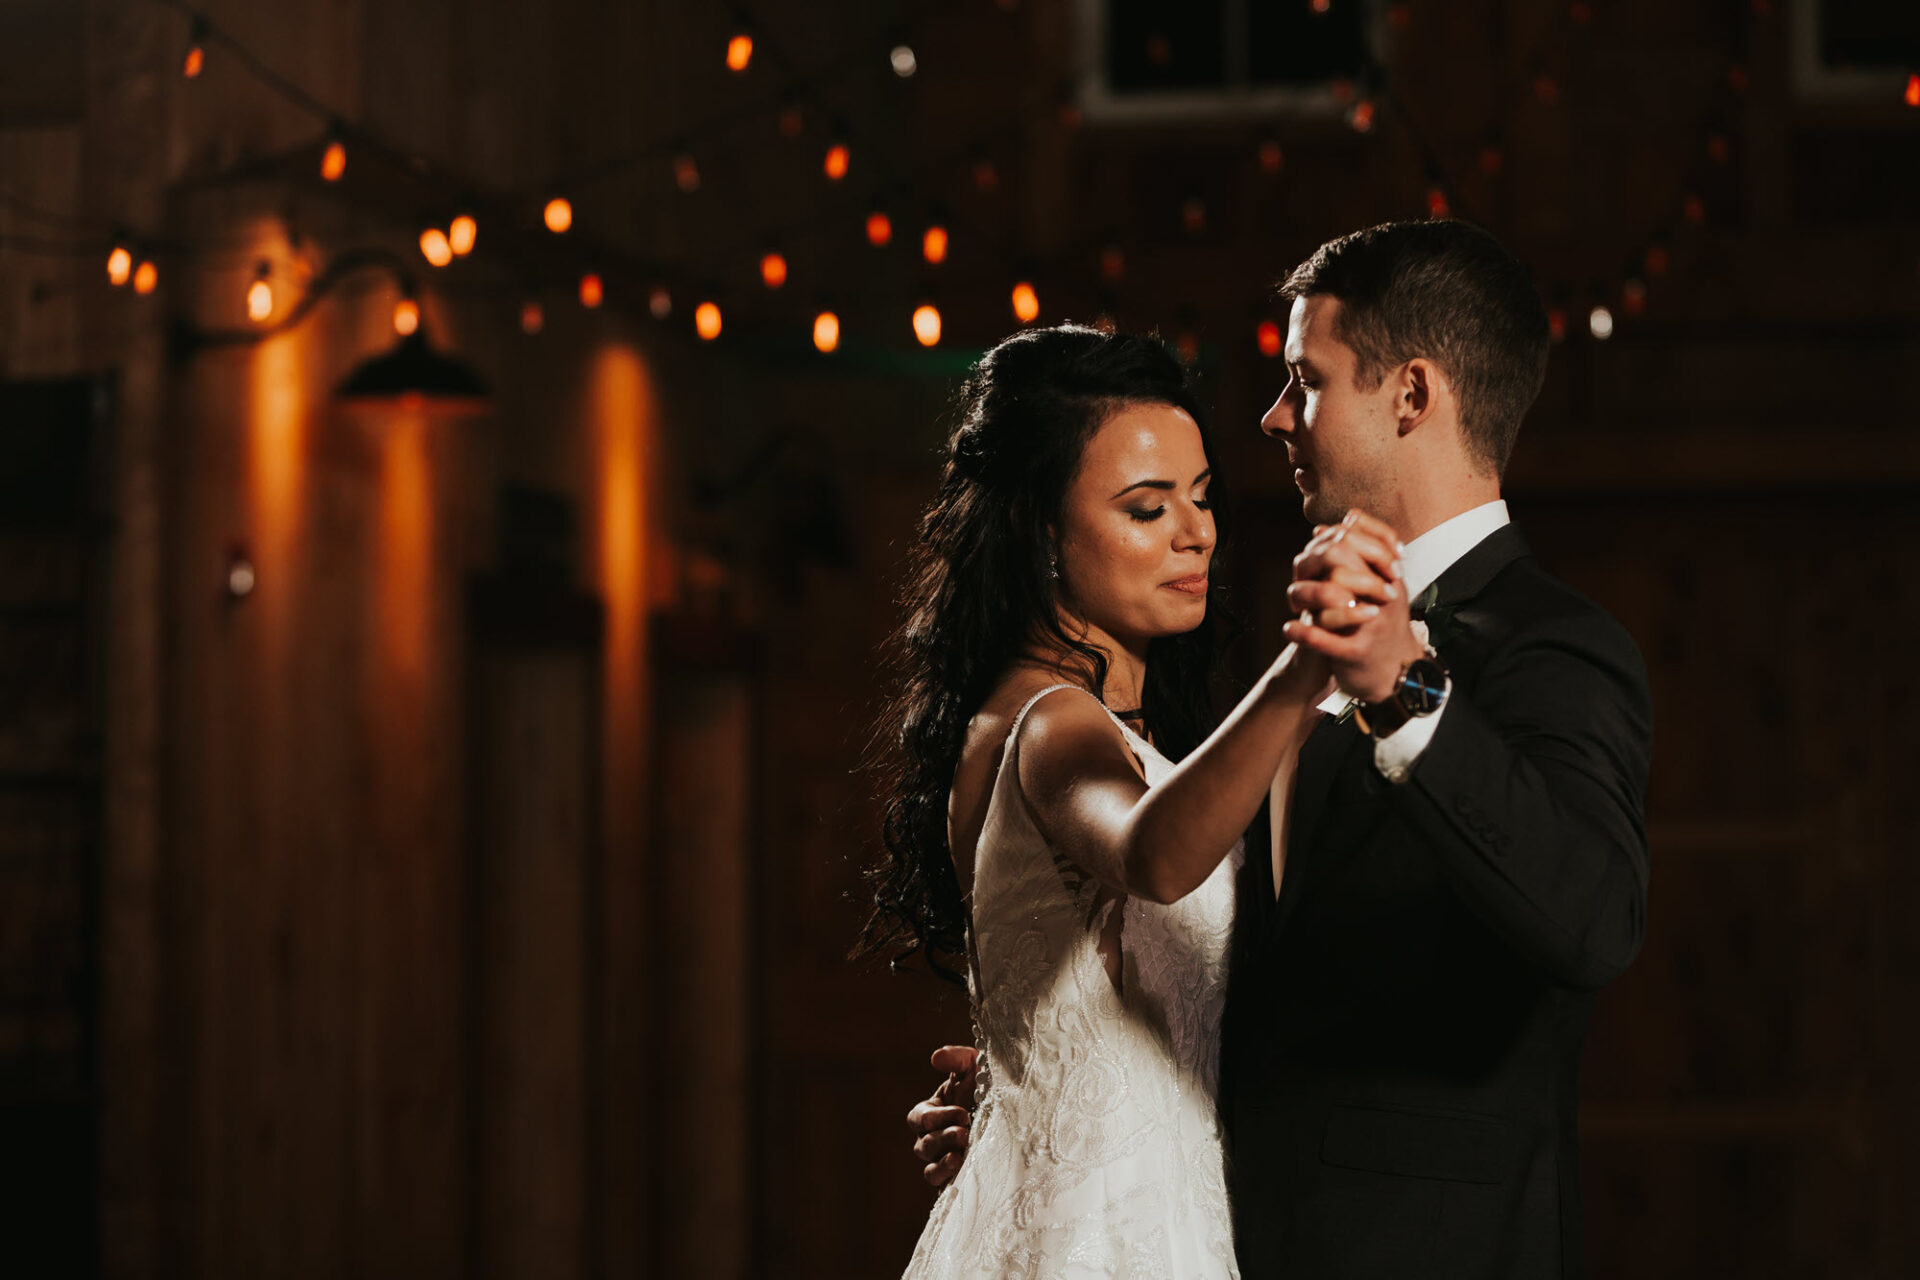 First Dance Wedding Songs - 290+ Songs To Choose From